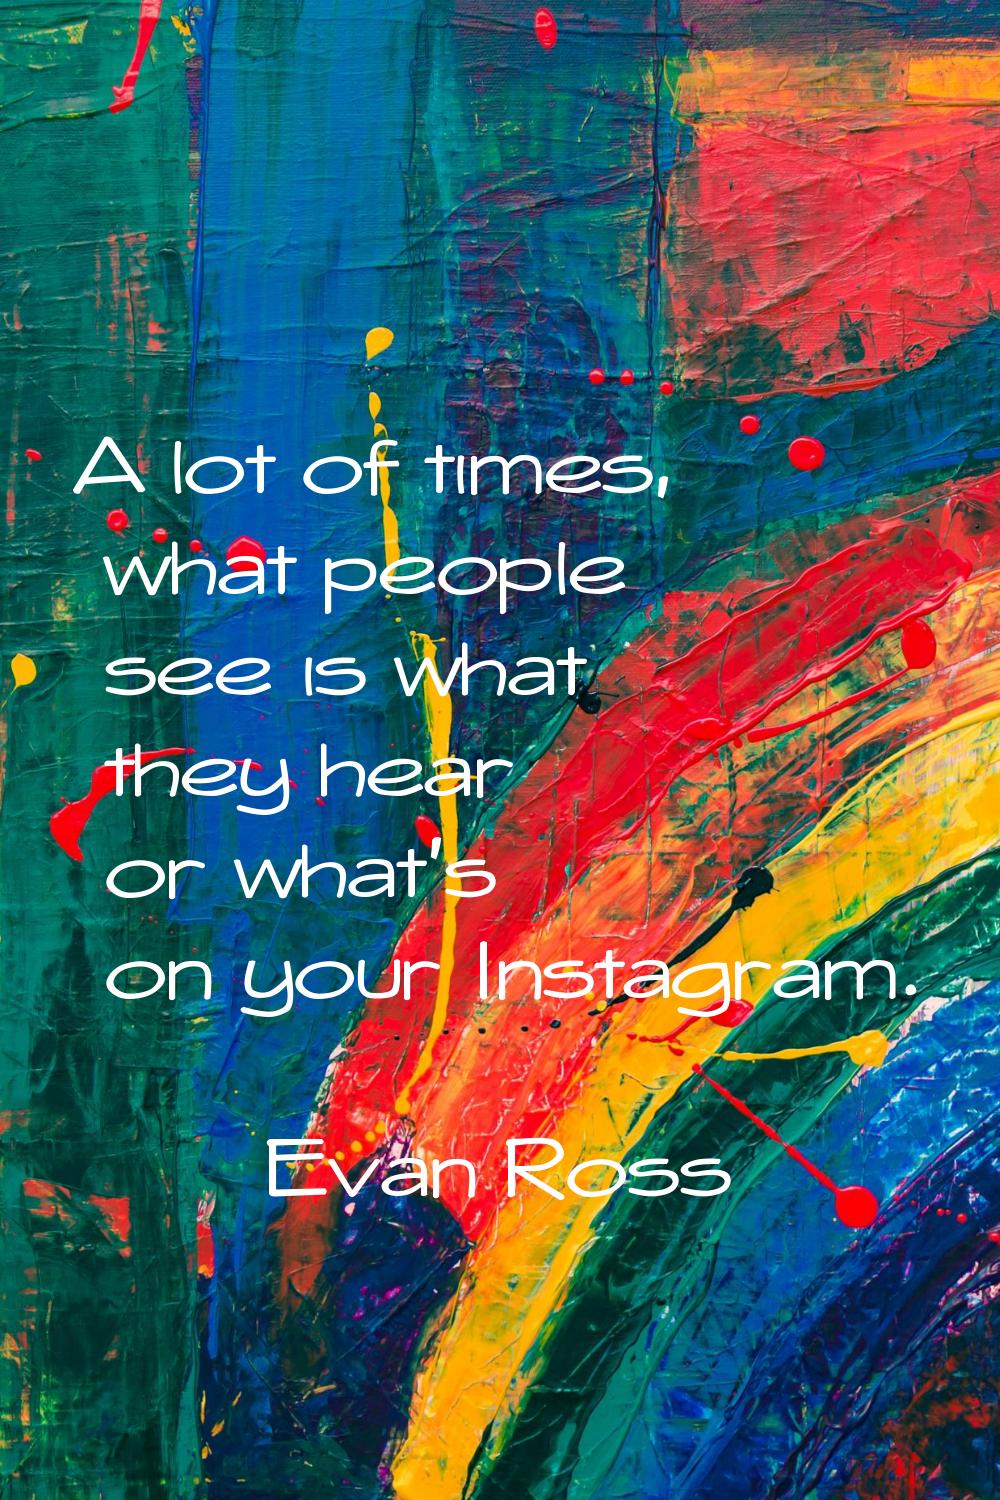 A lot of times, what people see is what they hear or what's on your Instagram.